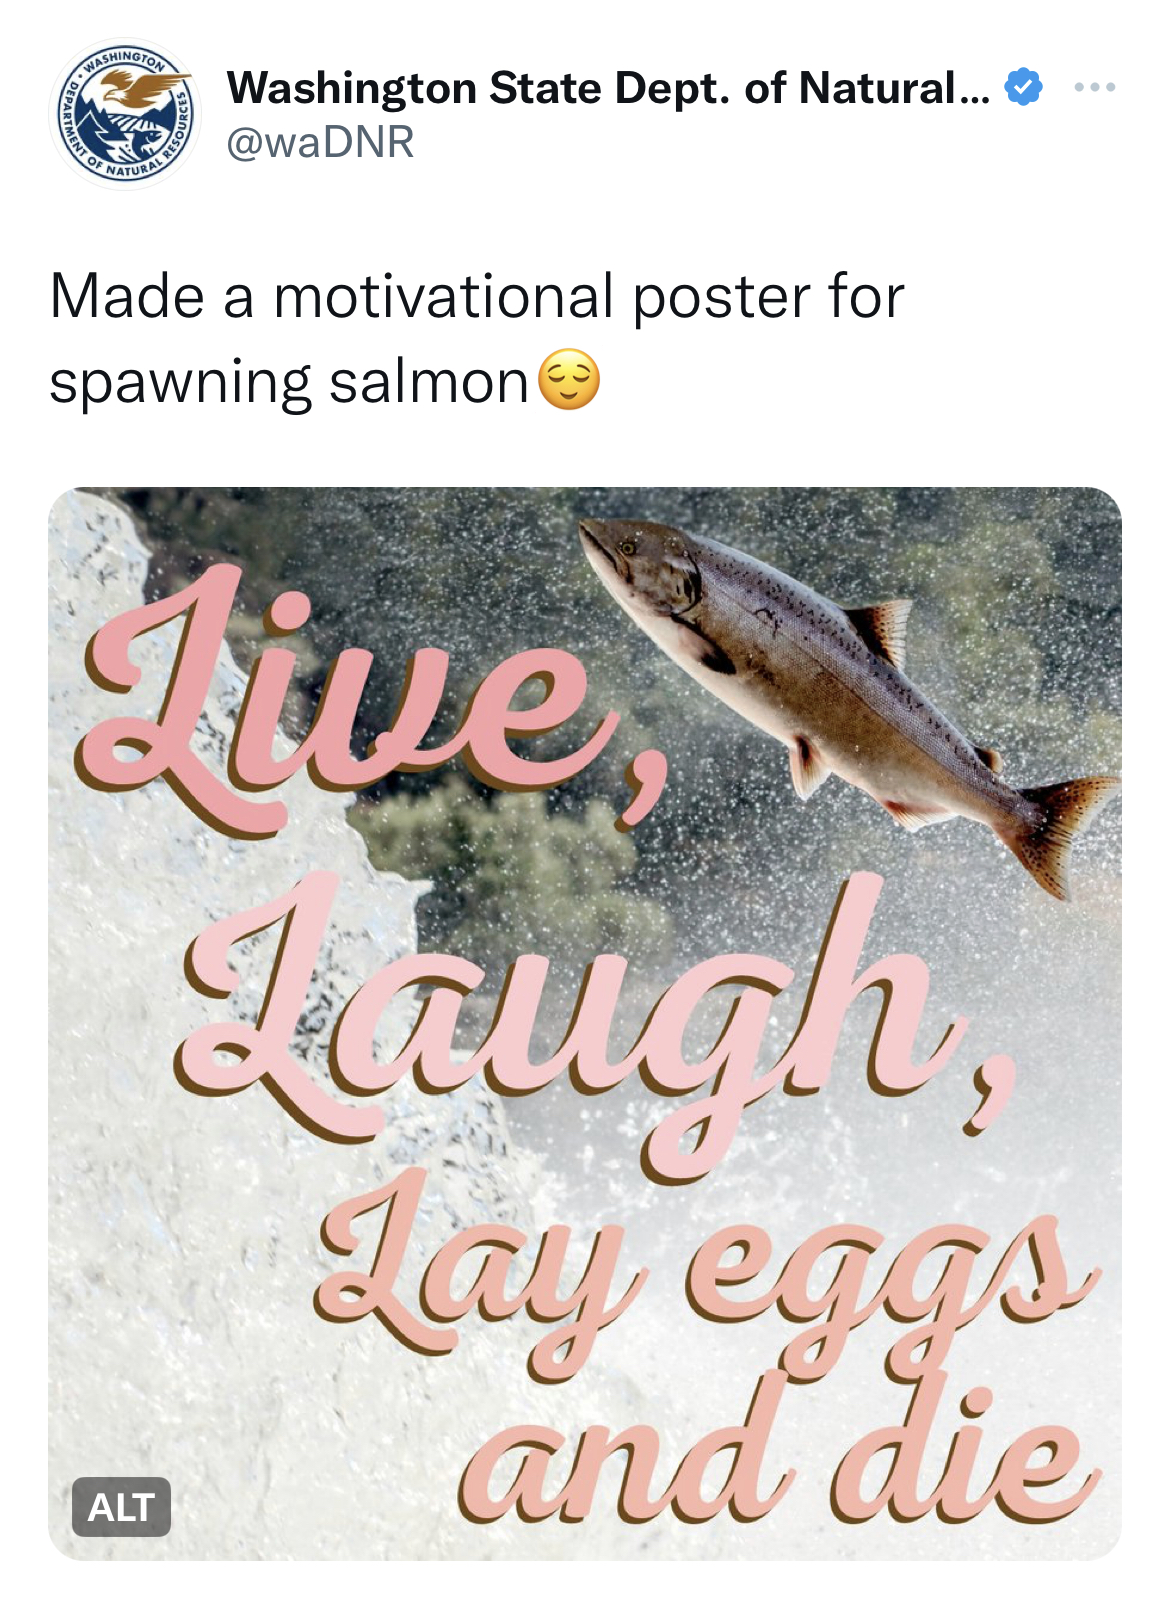 Washington Department of Natural Resources tweets - washington state department of natural resources twitter - Washington State Dept. of Natural... Made a motivational poster for spawning salmon Live Laugh Lay eggs and die Alt